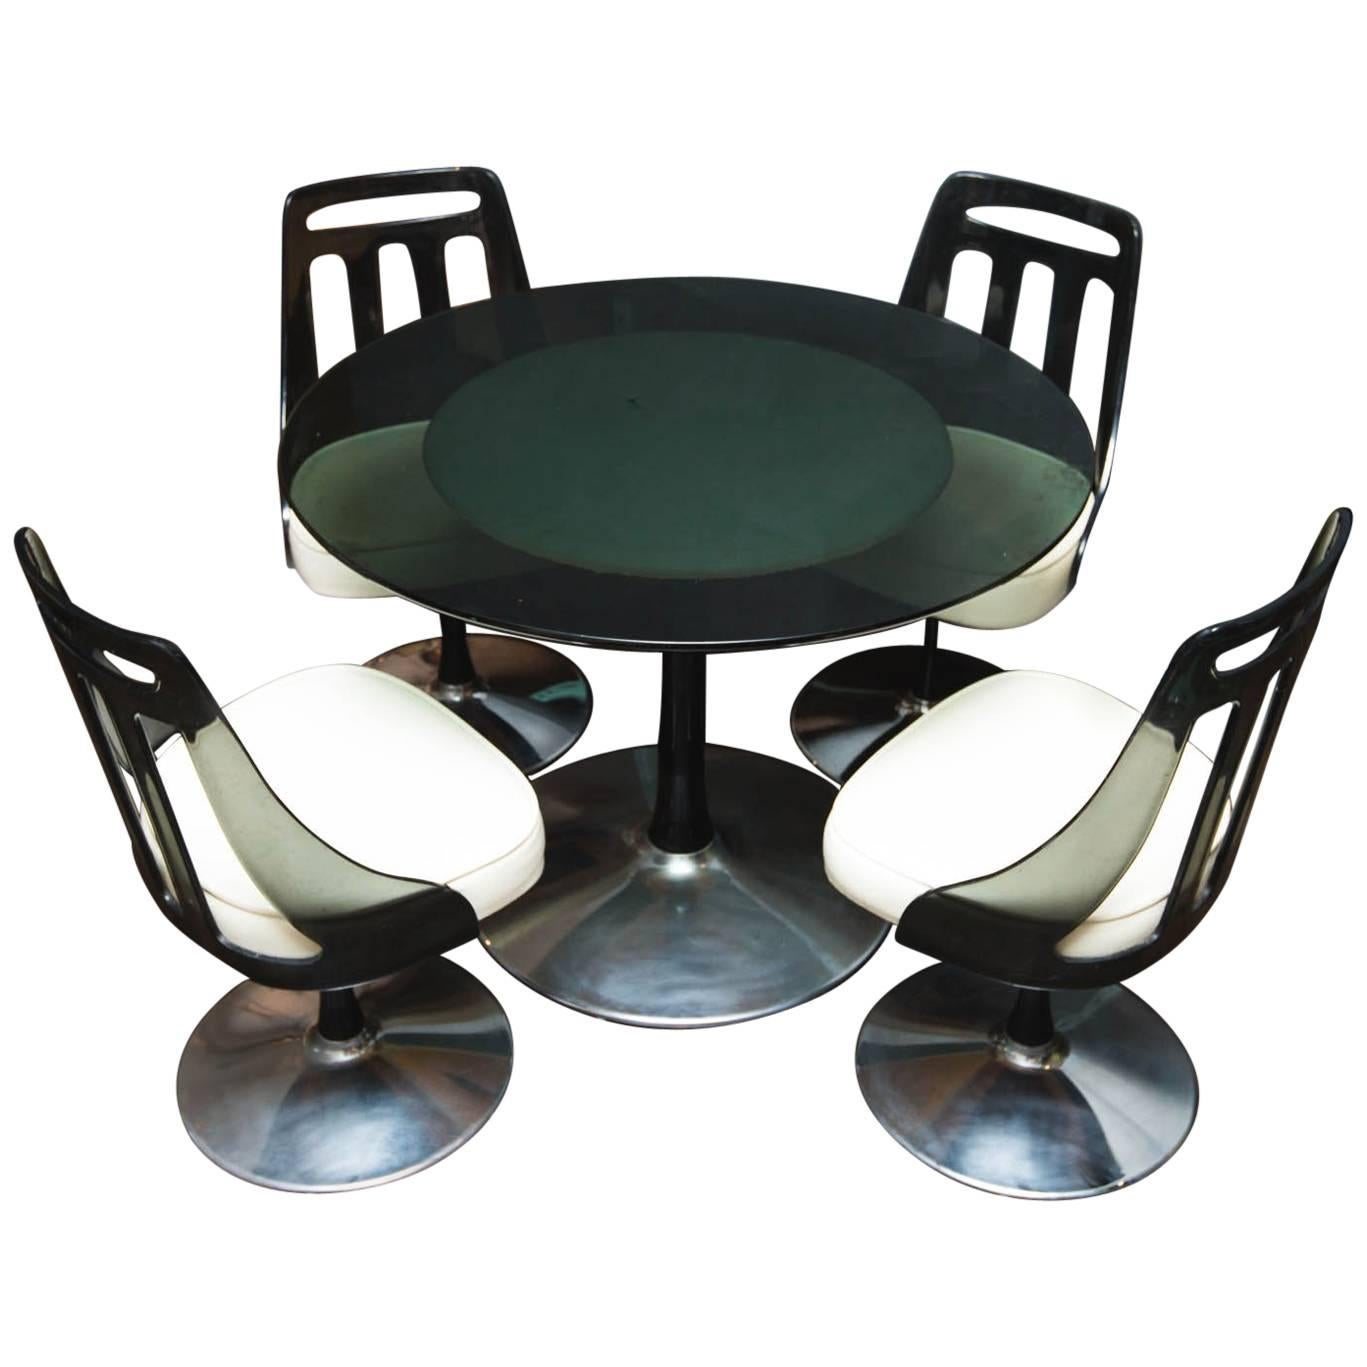 Vintage Lucite and Chrome Dinette Set by Soveriegn